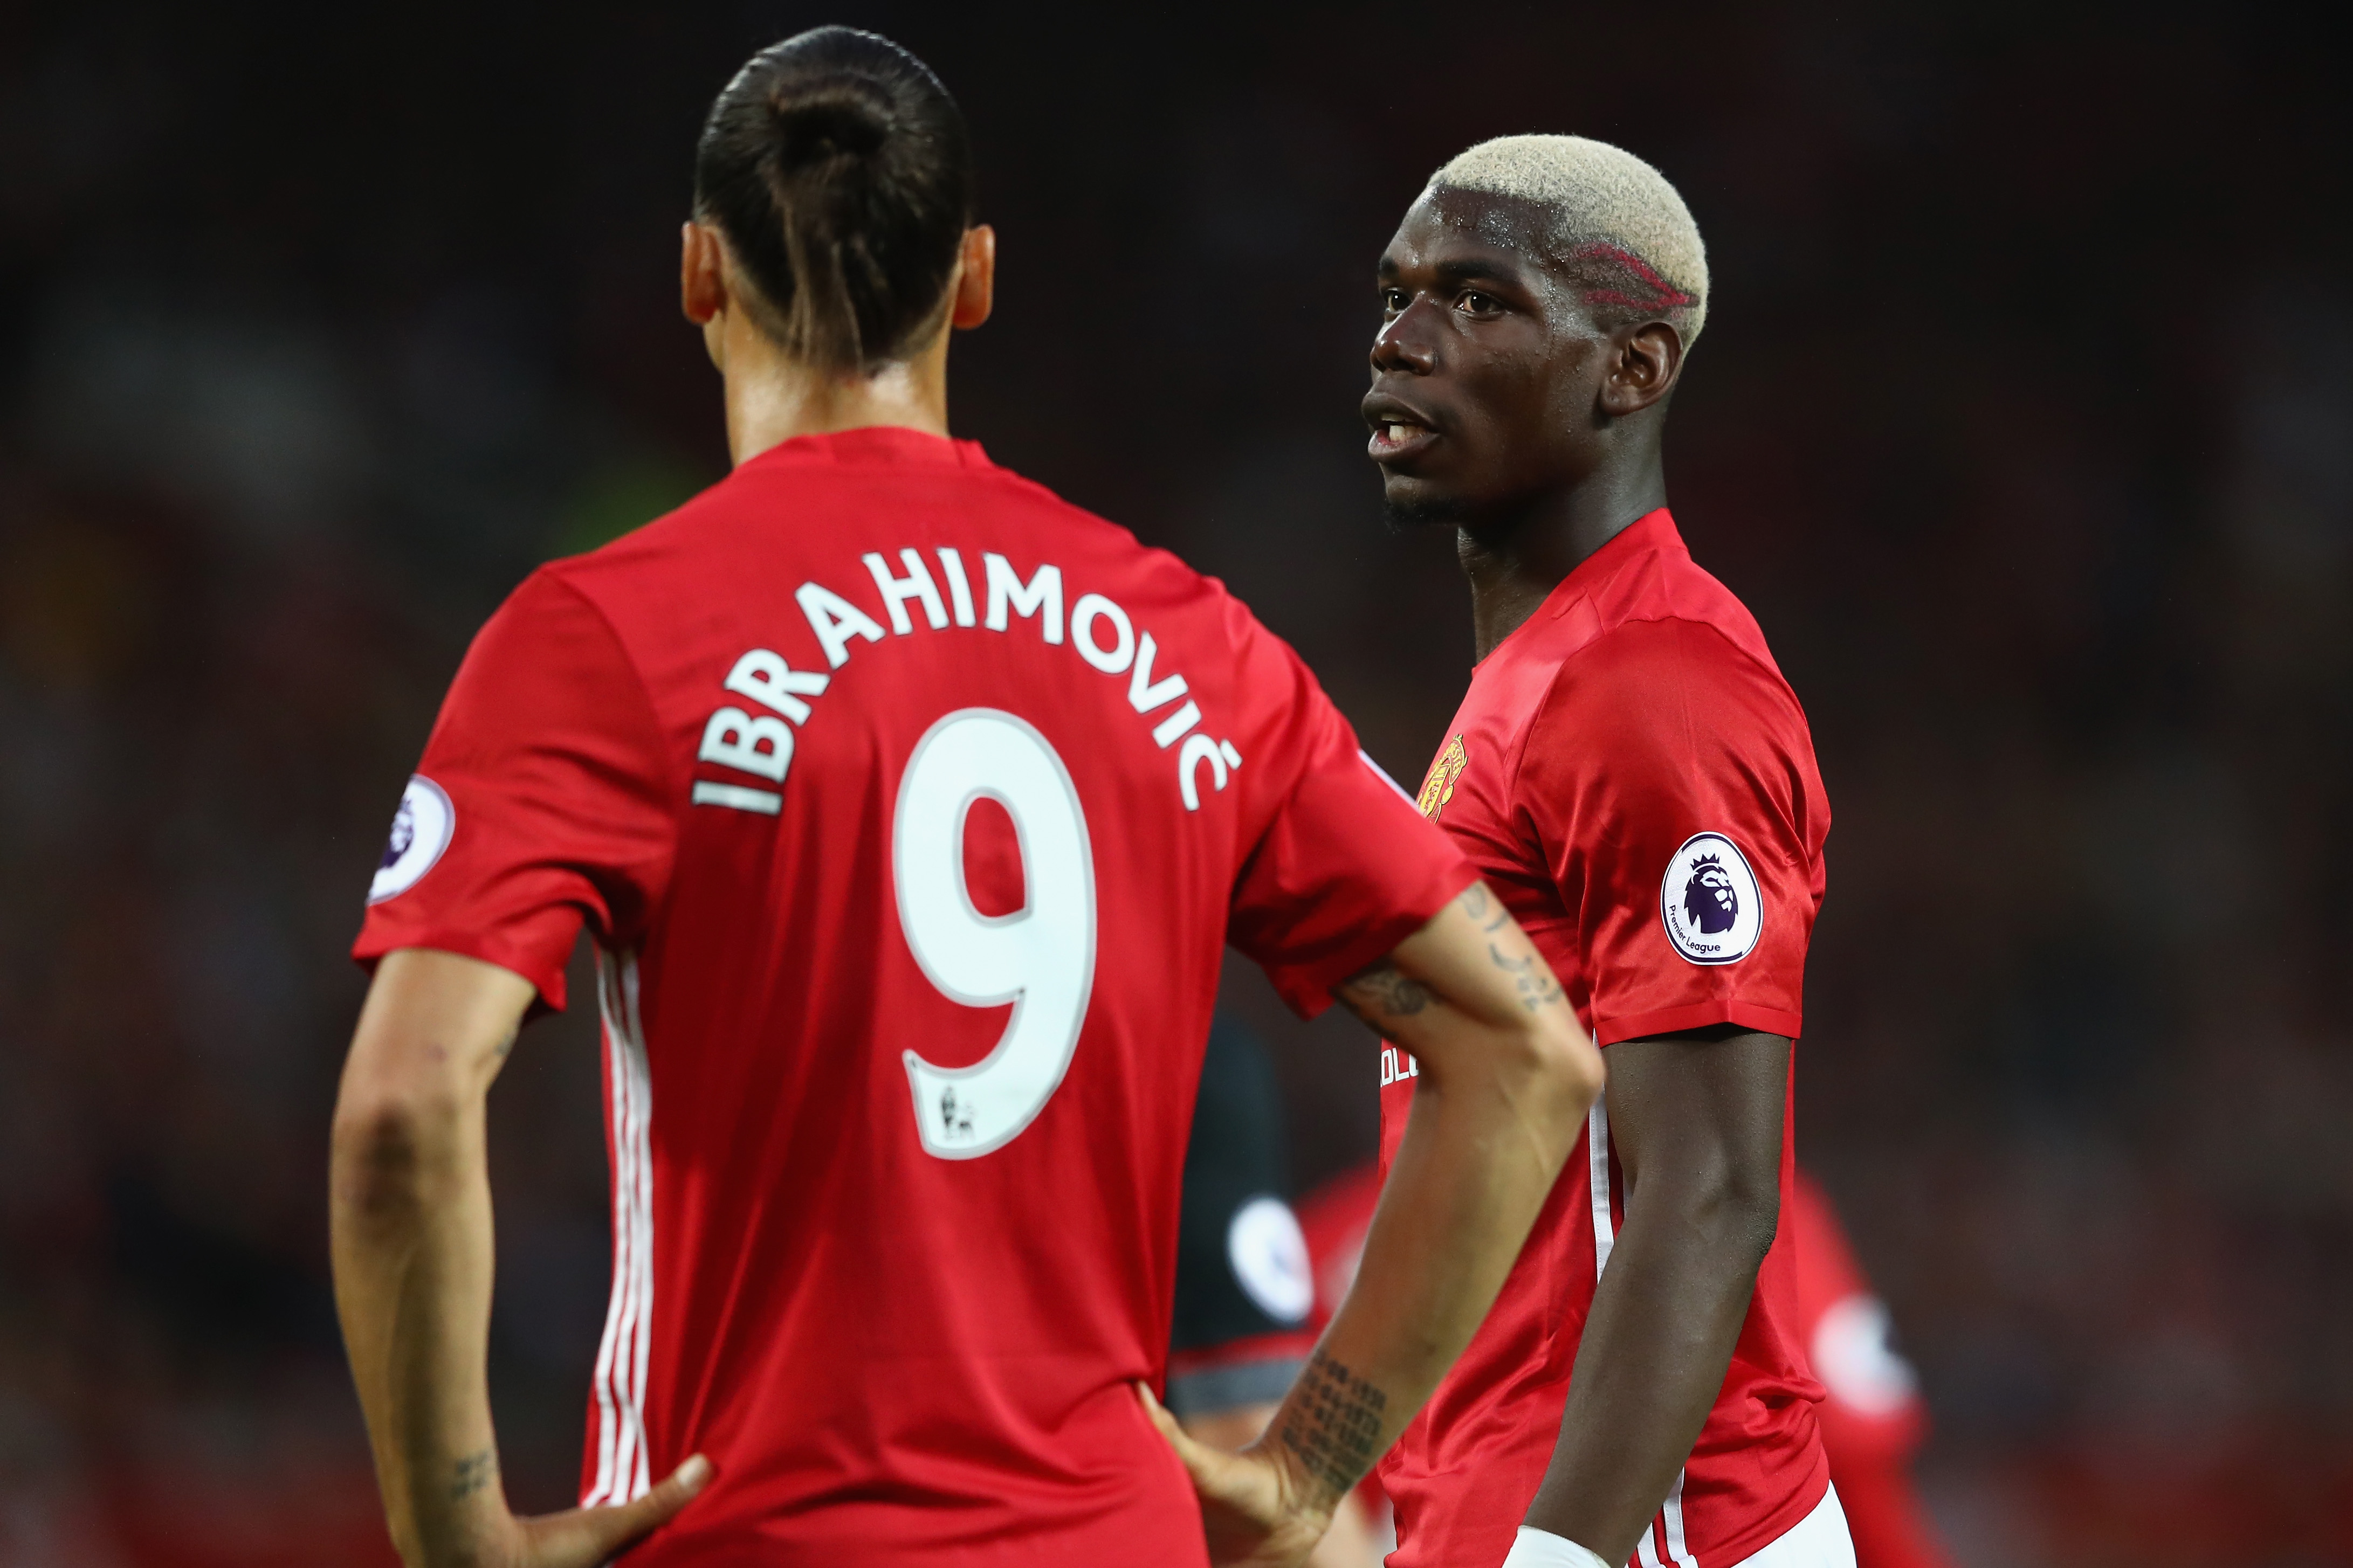 Manchester United: Pogba over the moon, Zlatan apologizes to fans